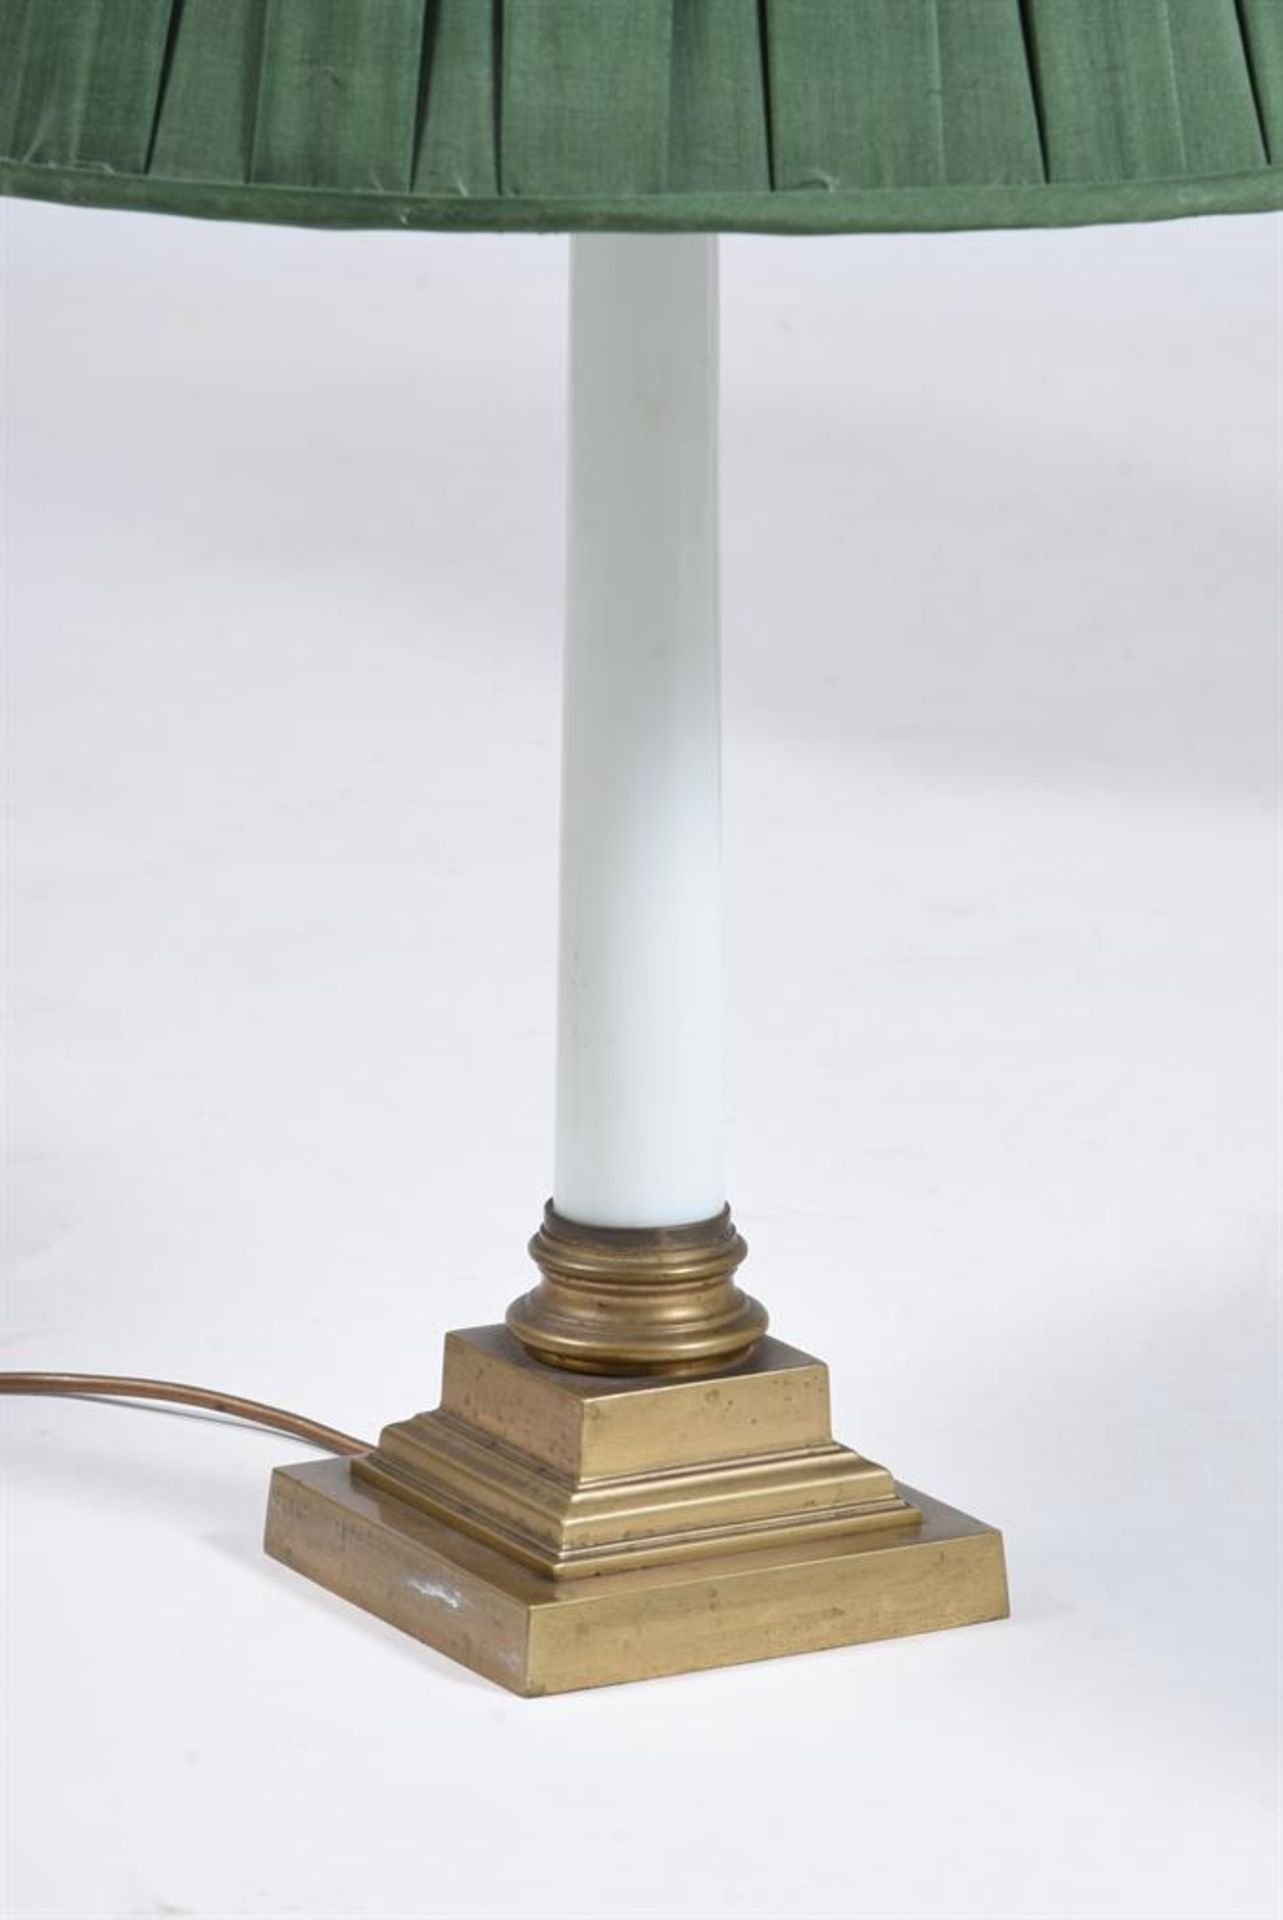 A PAIR OF BRASS MOUNTED WHITE GLASS COLUMN TABLE LAMPS - Image 2 of 2